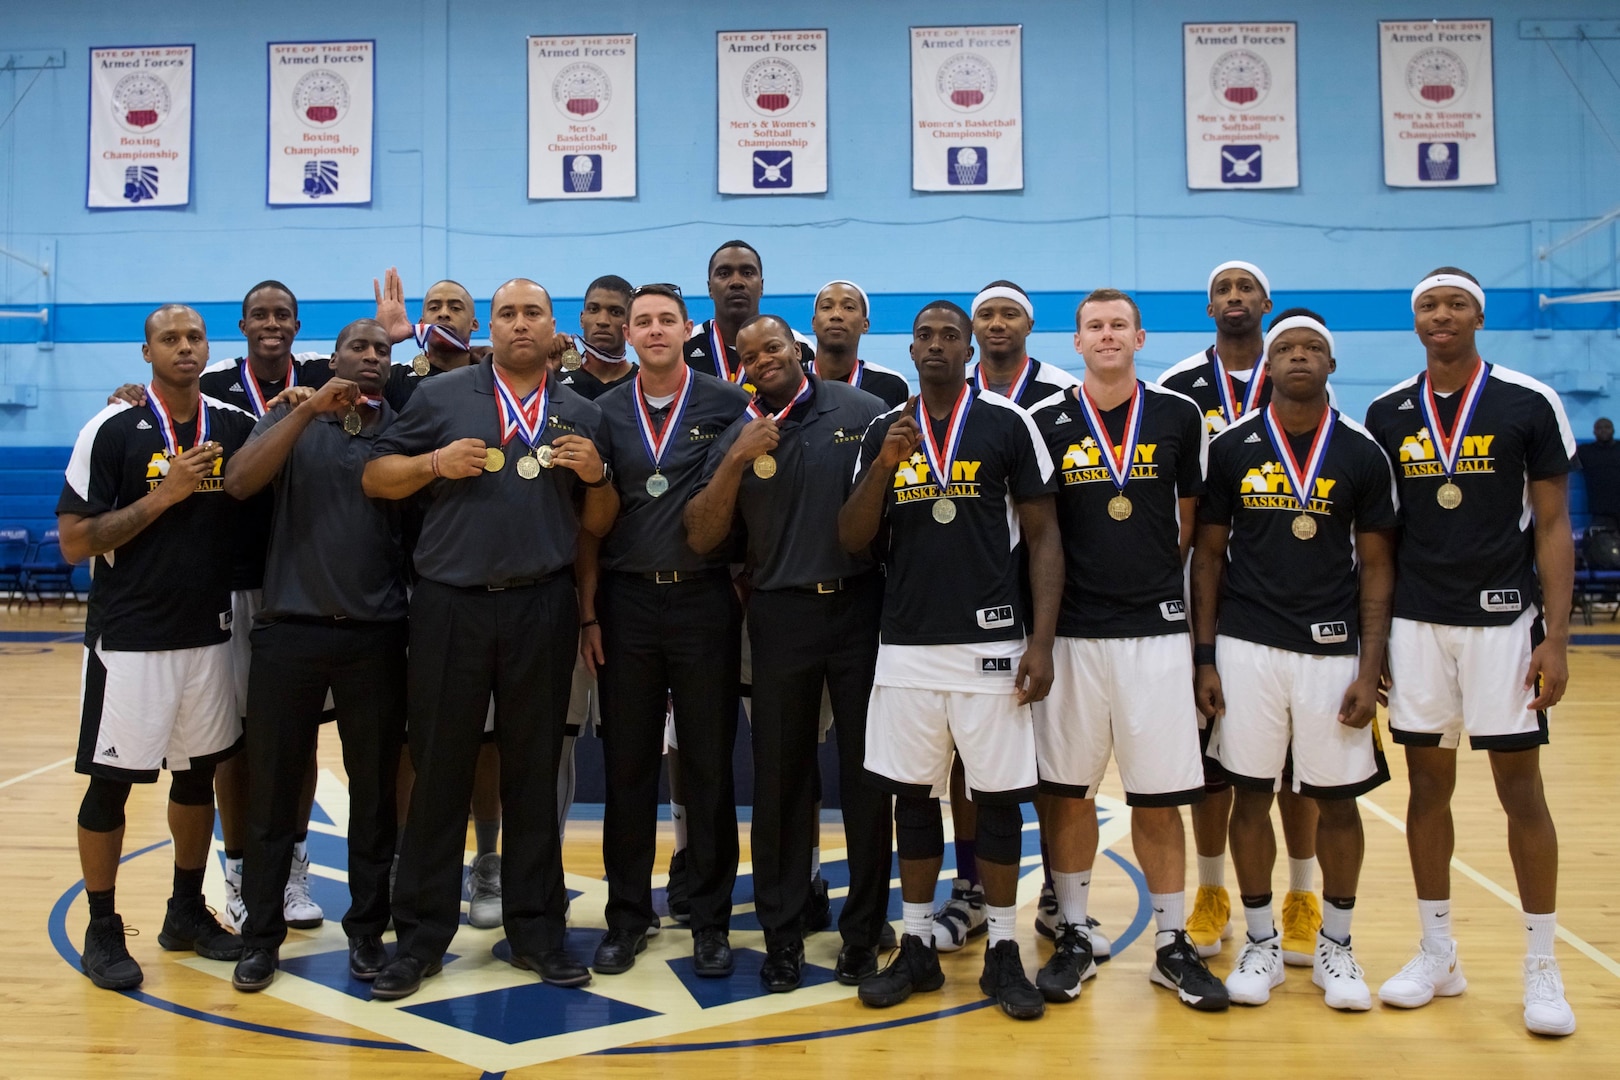 2017 Armed Forces Basketball Championship